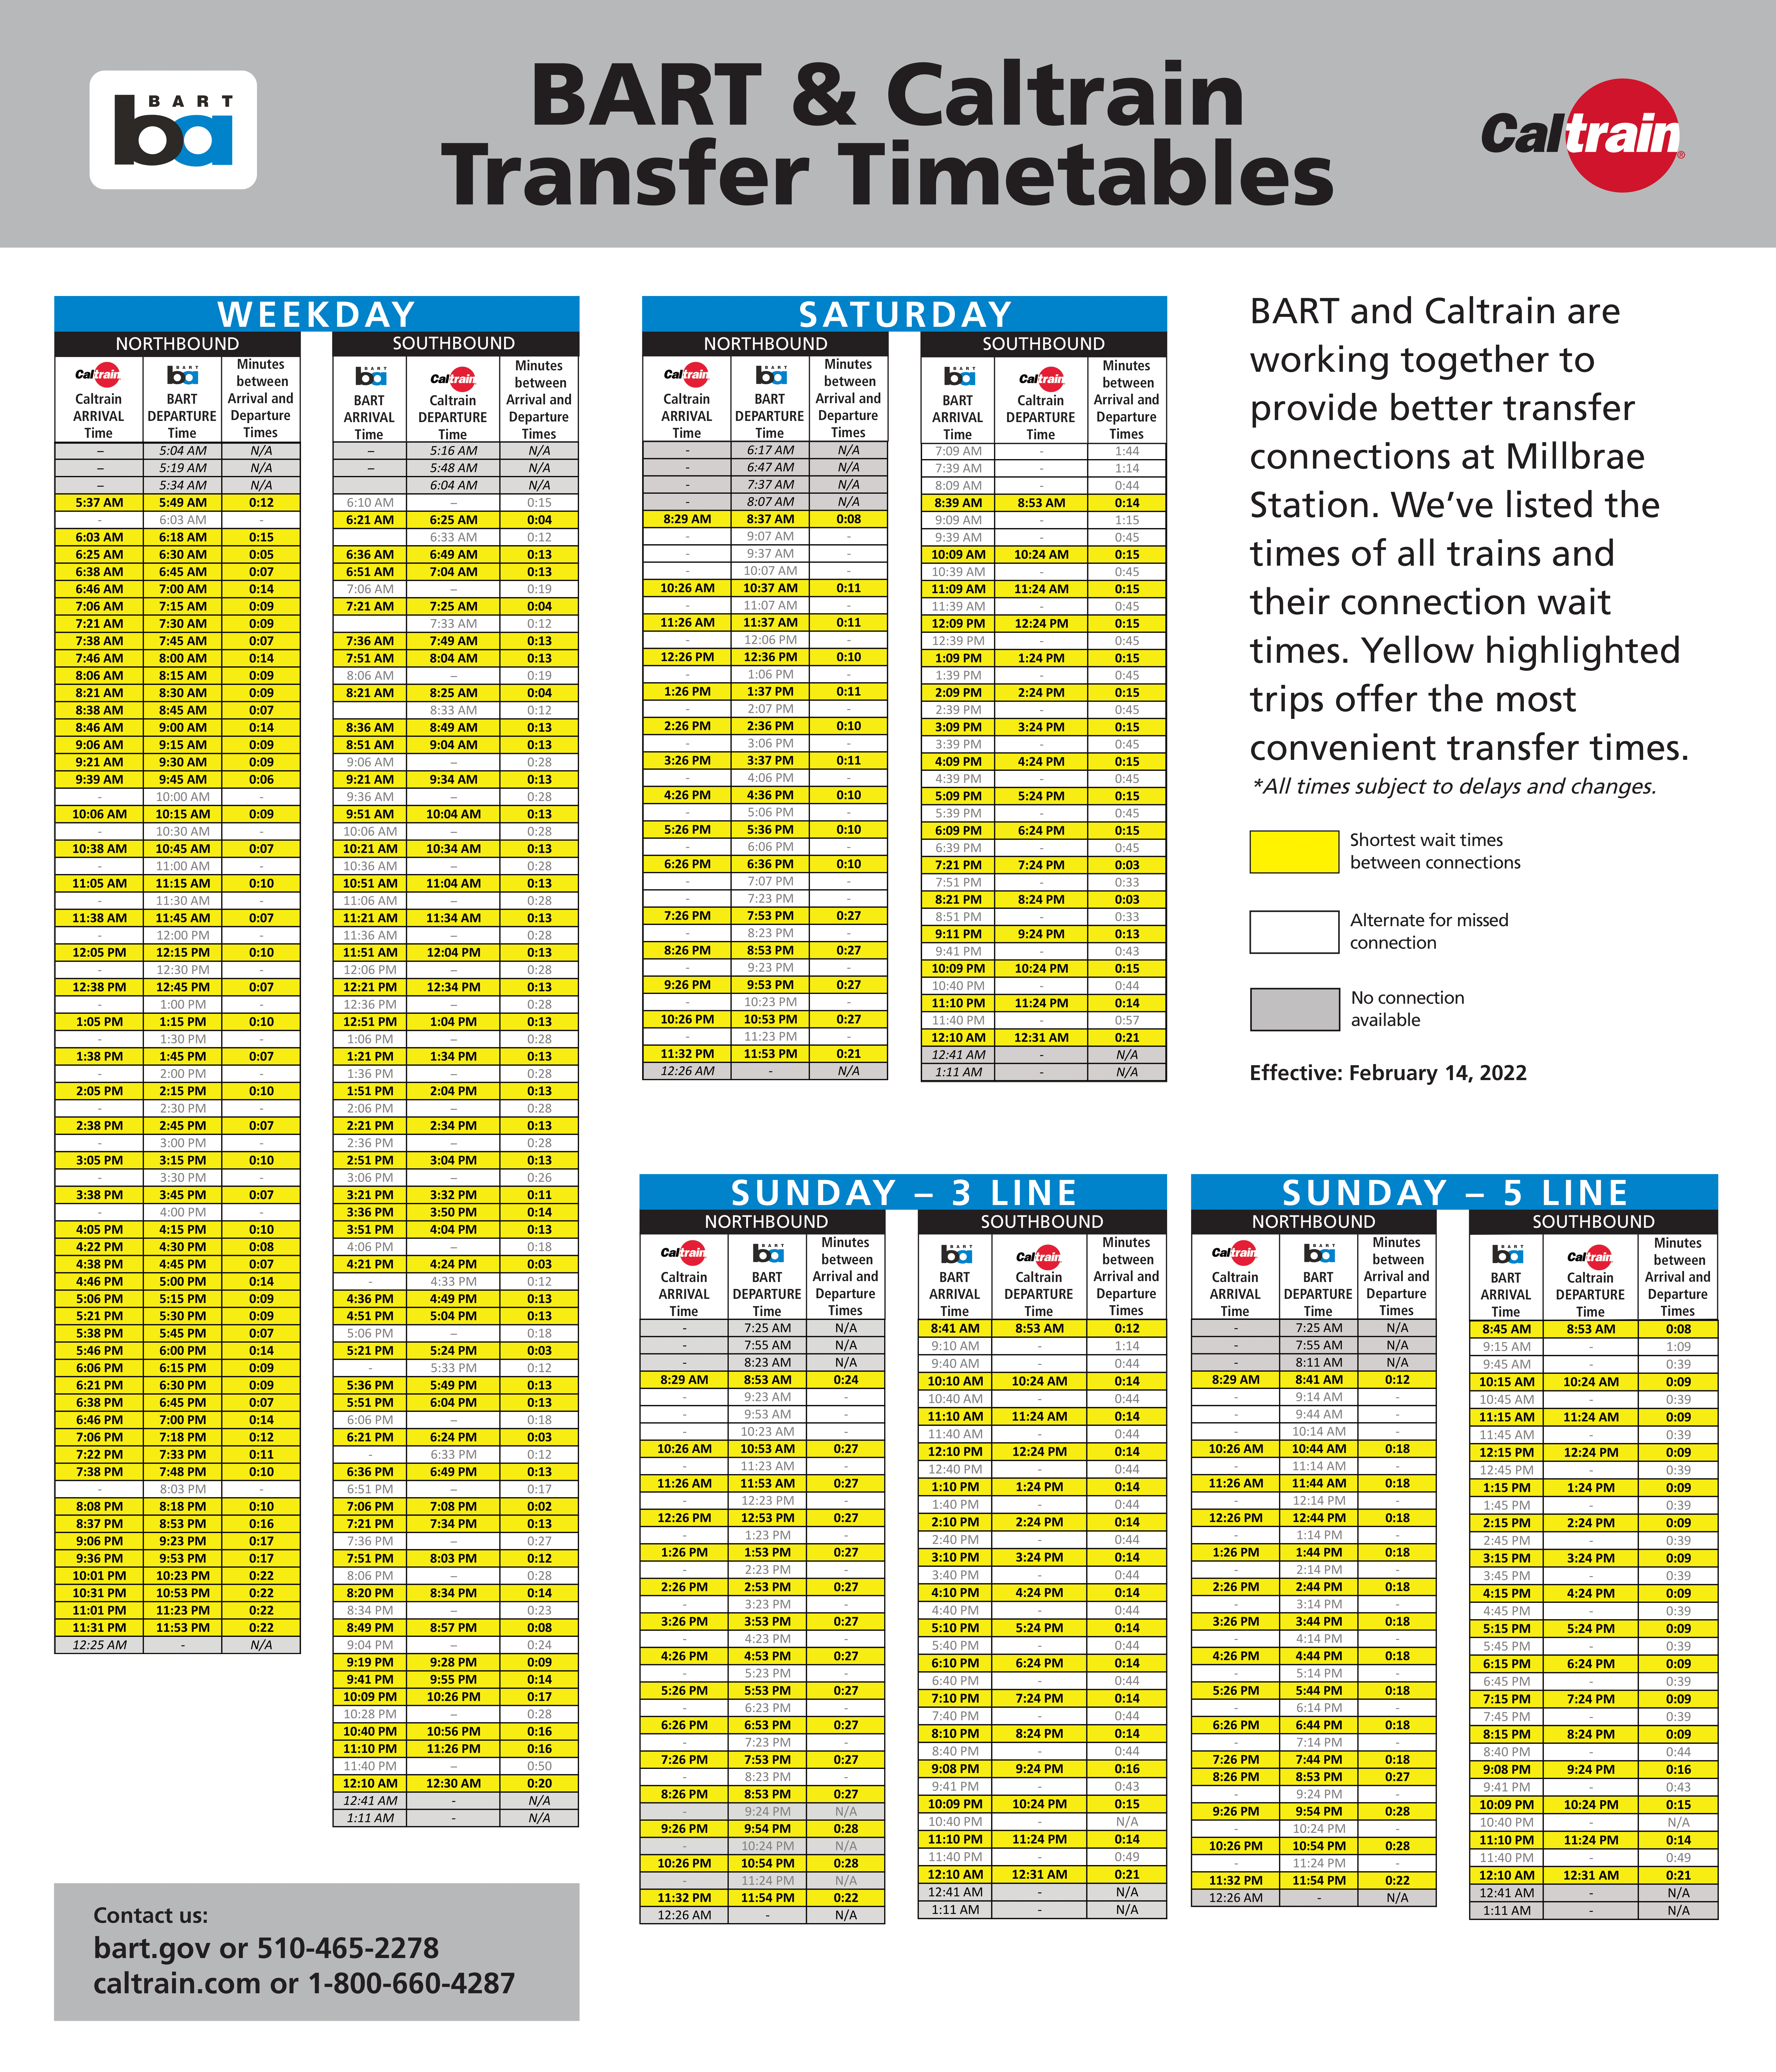 Weekday, Saturday and Sunday BART and Caltrain transfer times reflecting February 14, 2022 schedule change